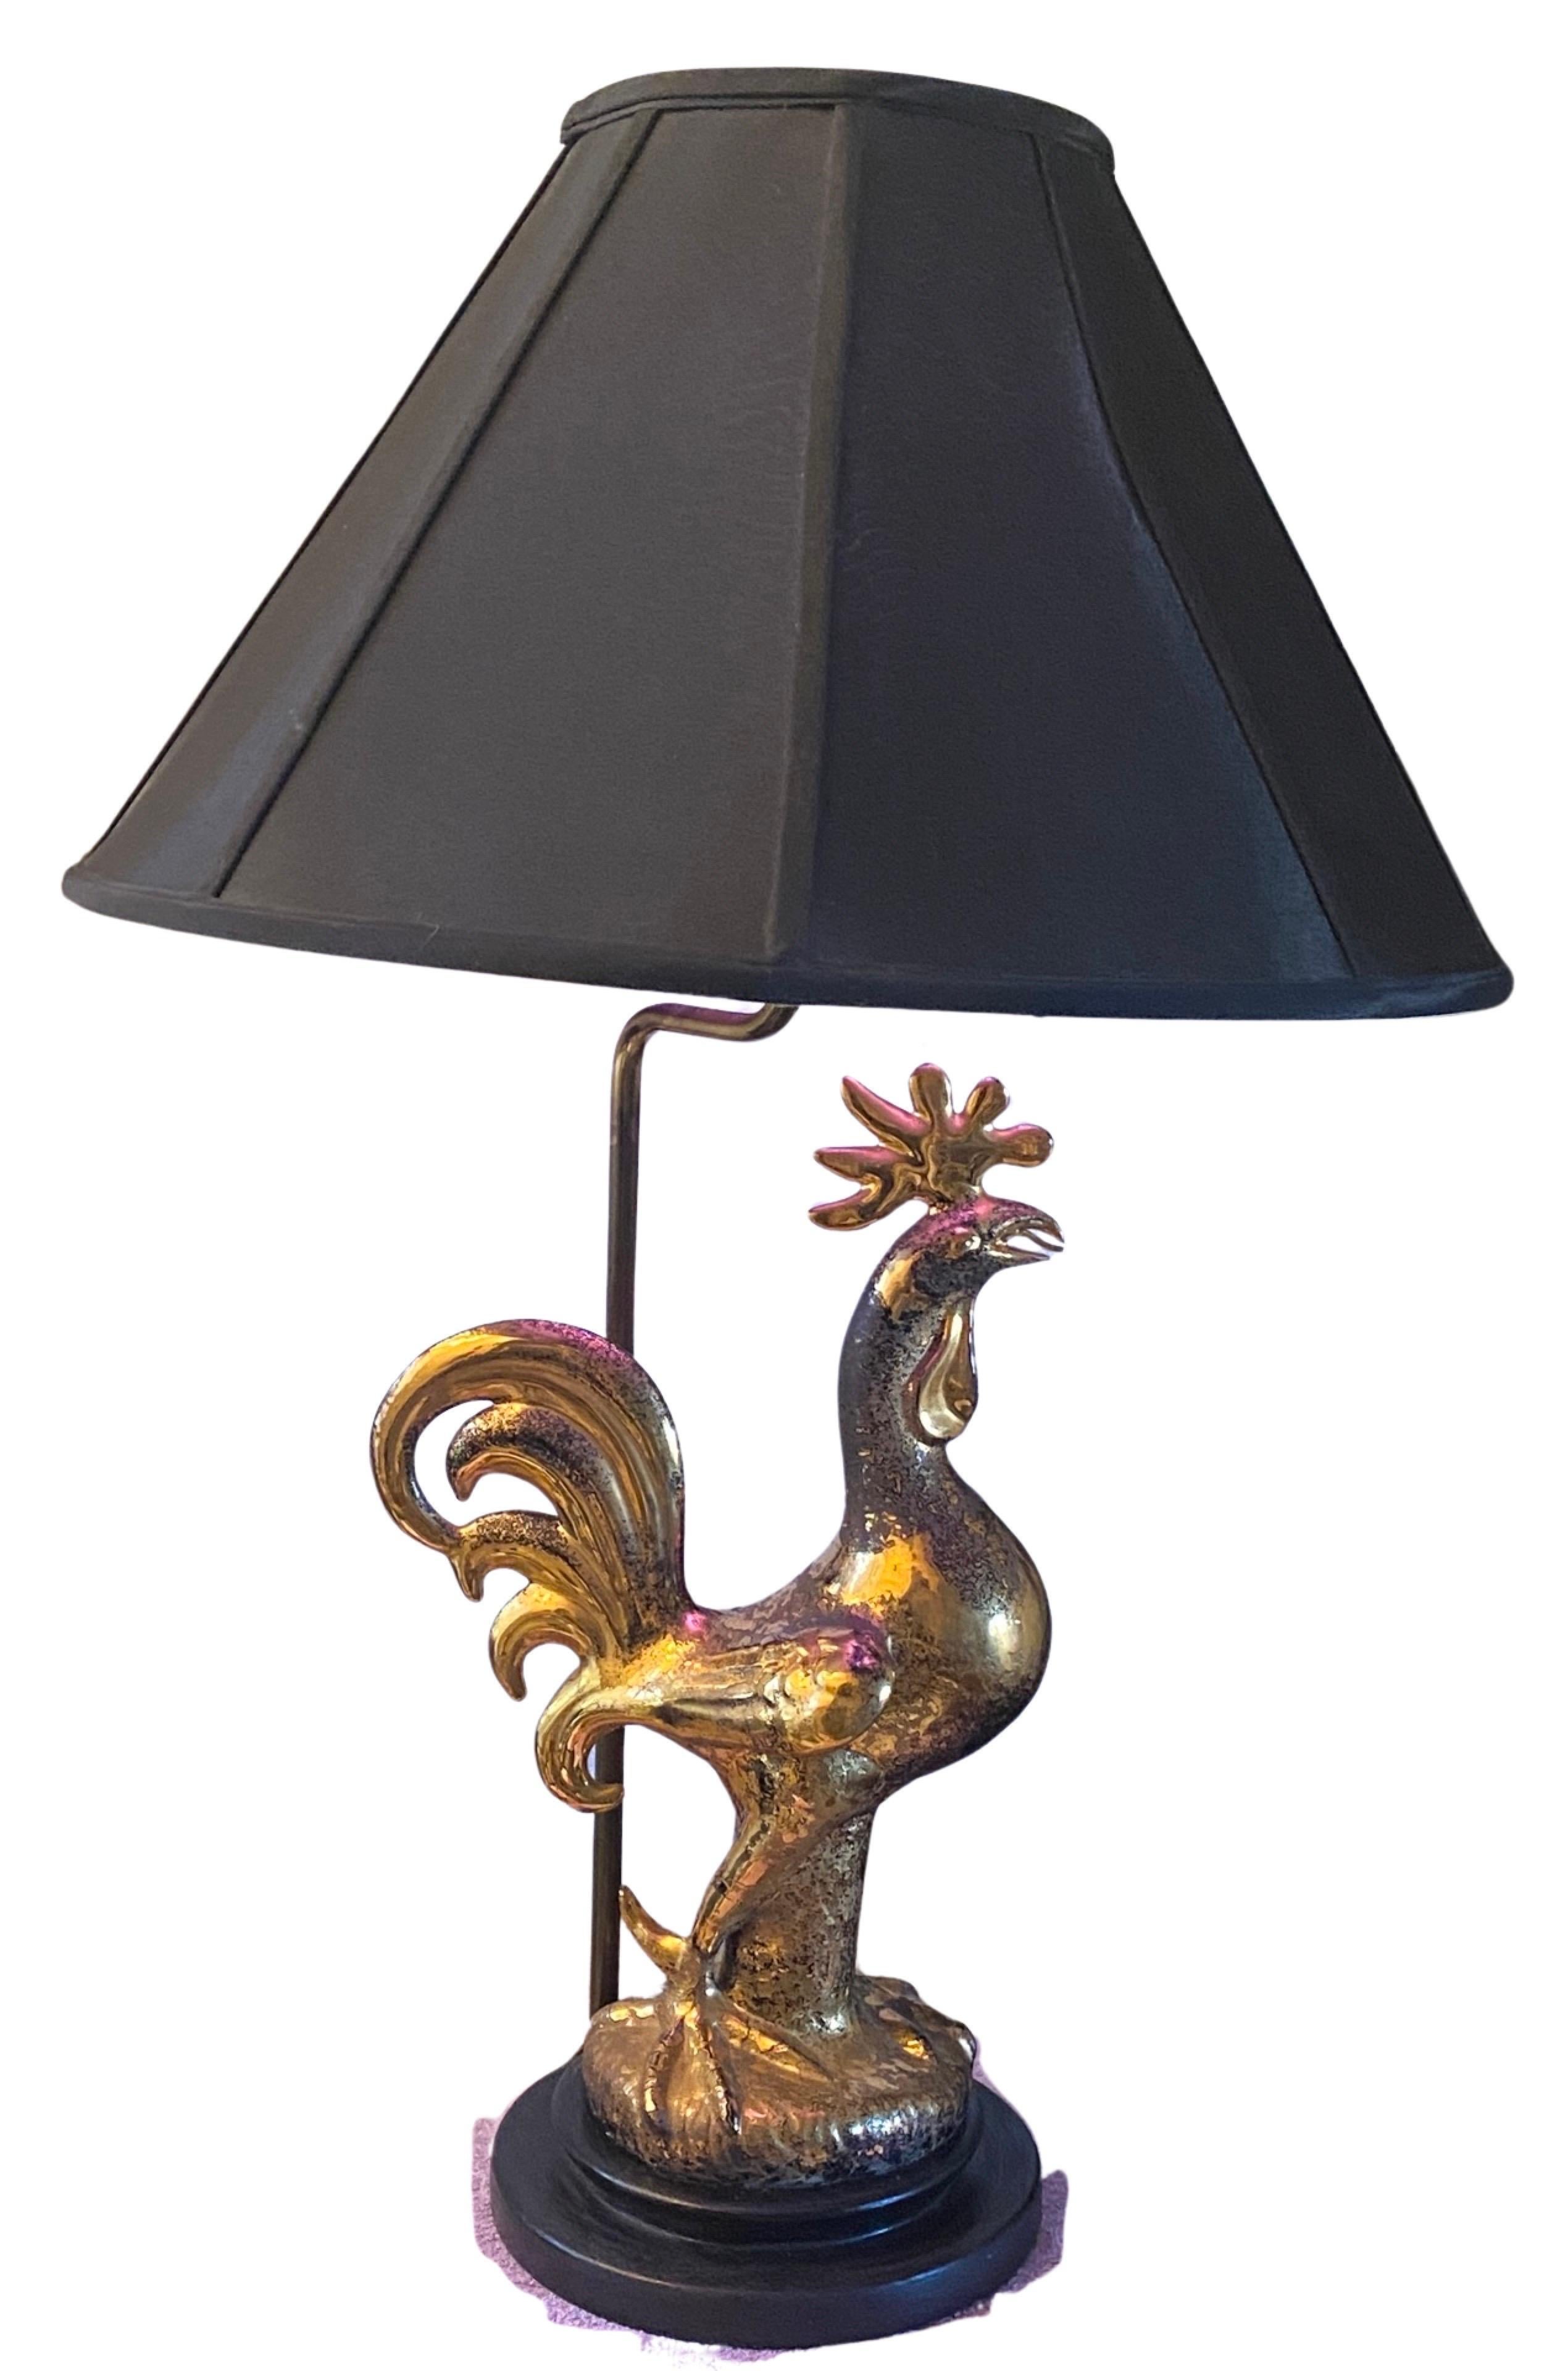 Mid-20th Century Sascha Brastoff One of a Kind Gold Plated and Black Rooster Table Lamp  Signed  For Sale